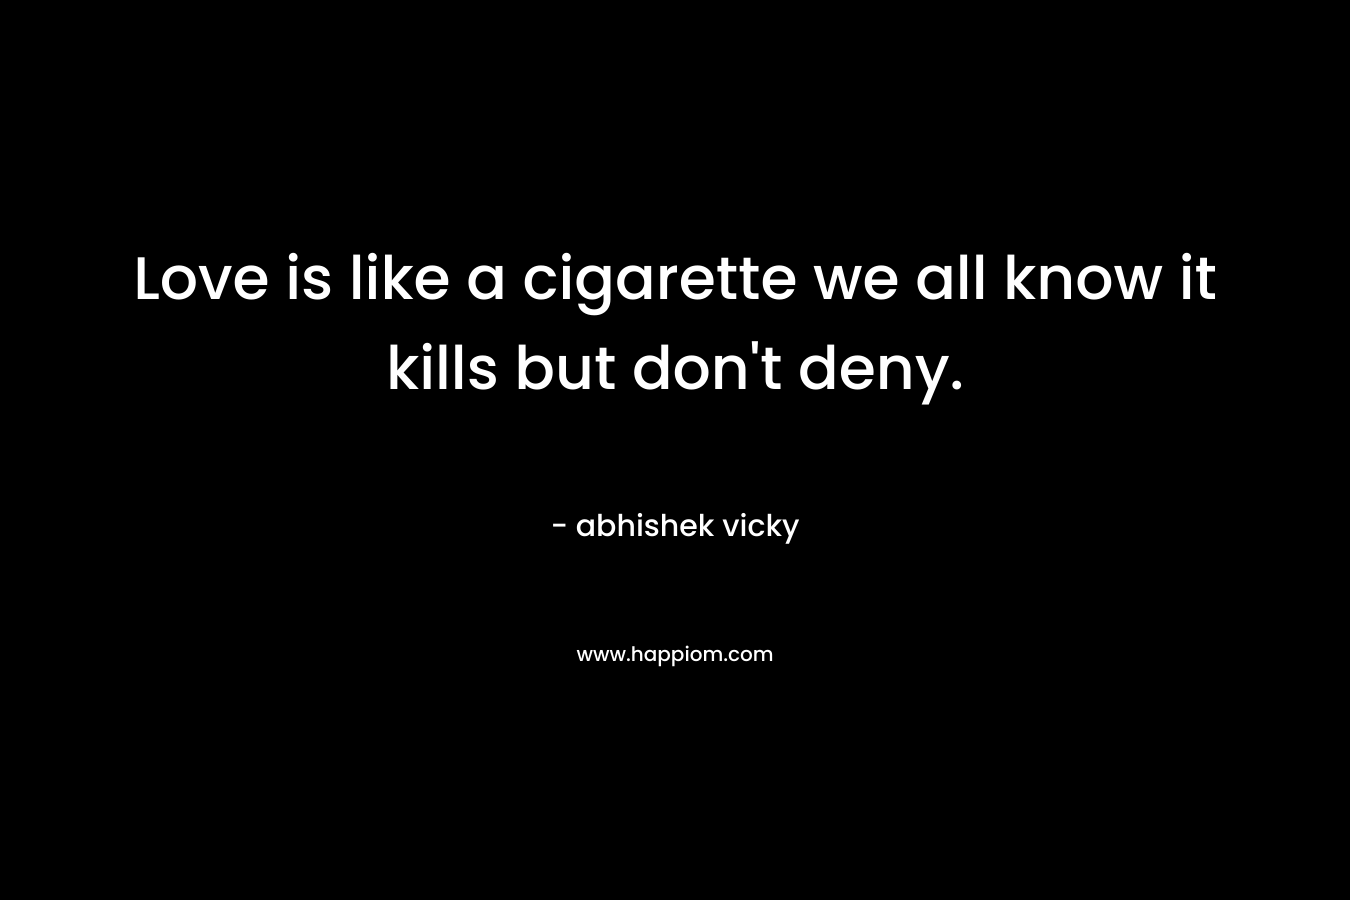 Love is like a cigarette we all know it kills but don’t deny. – abhishek vicky